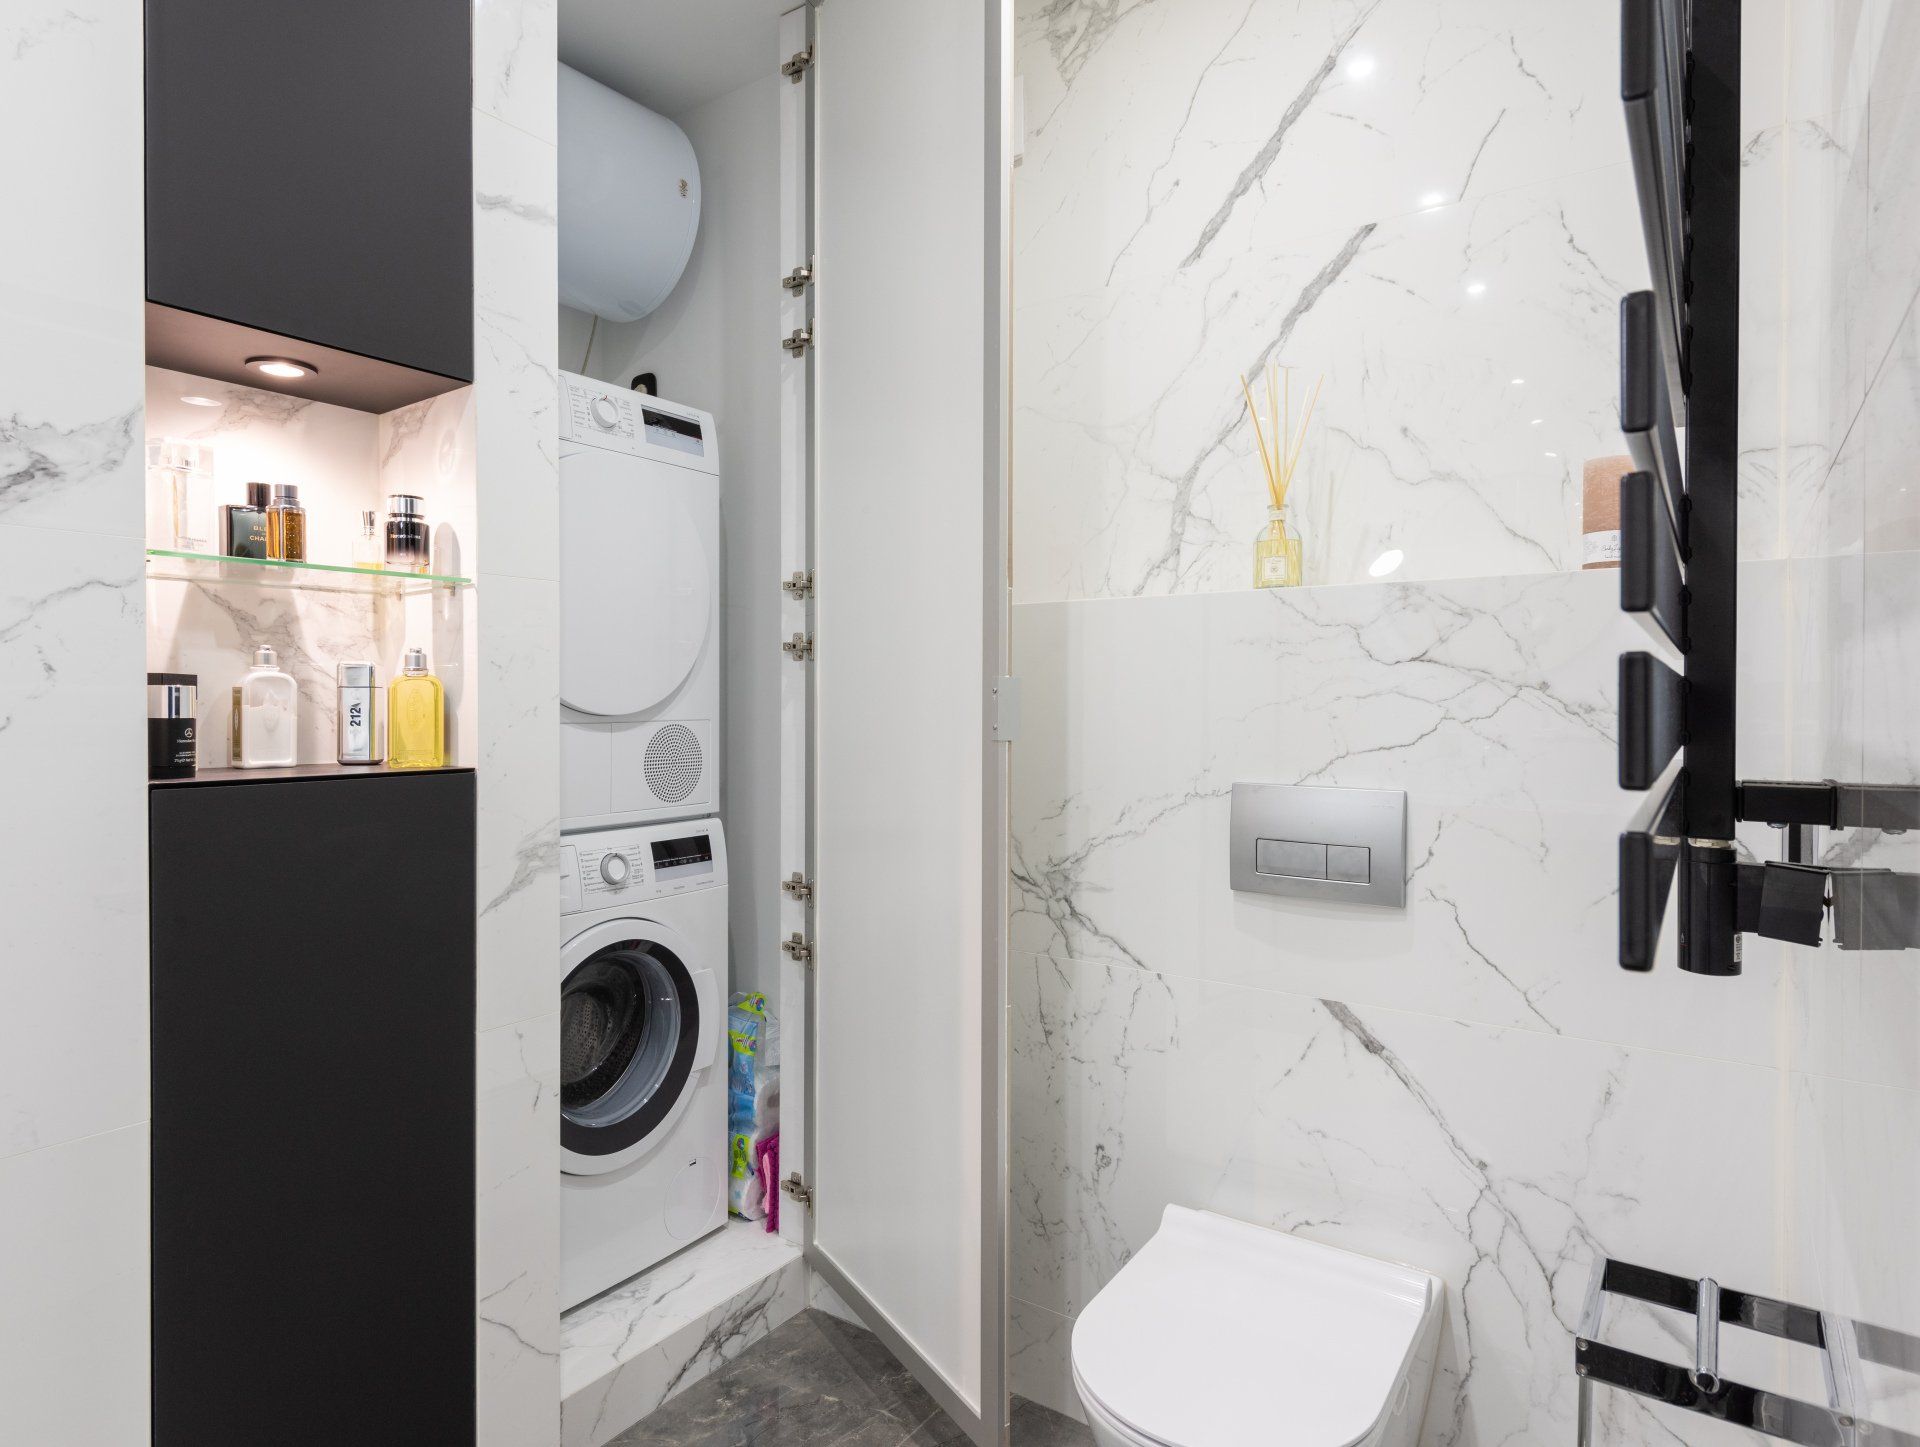 a washer and dryer combo unit in a bathroom closet